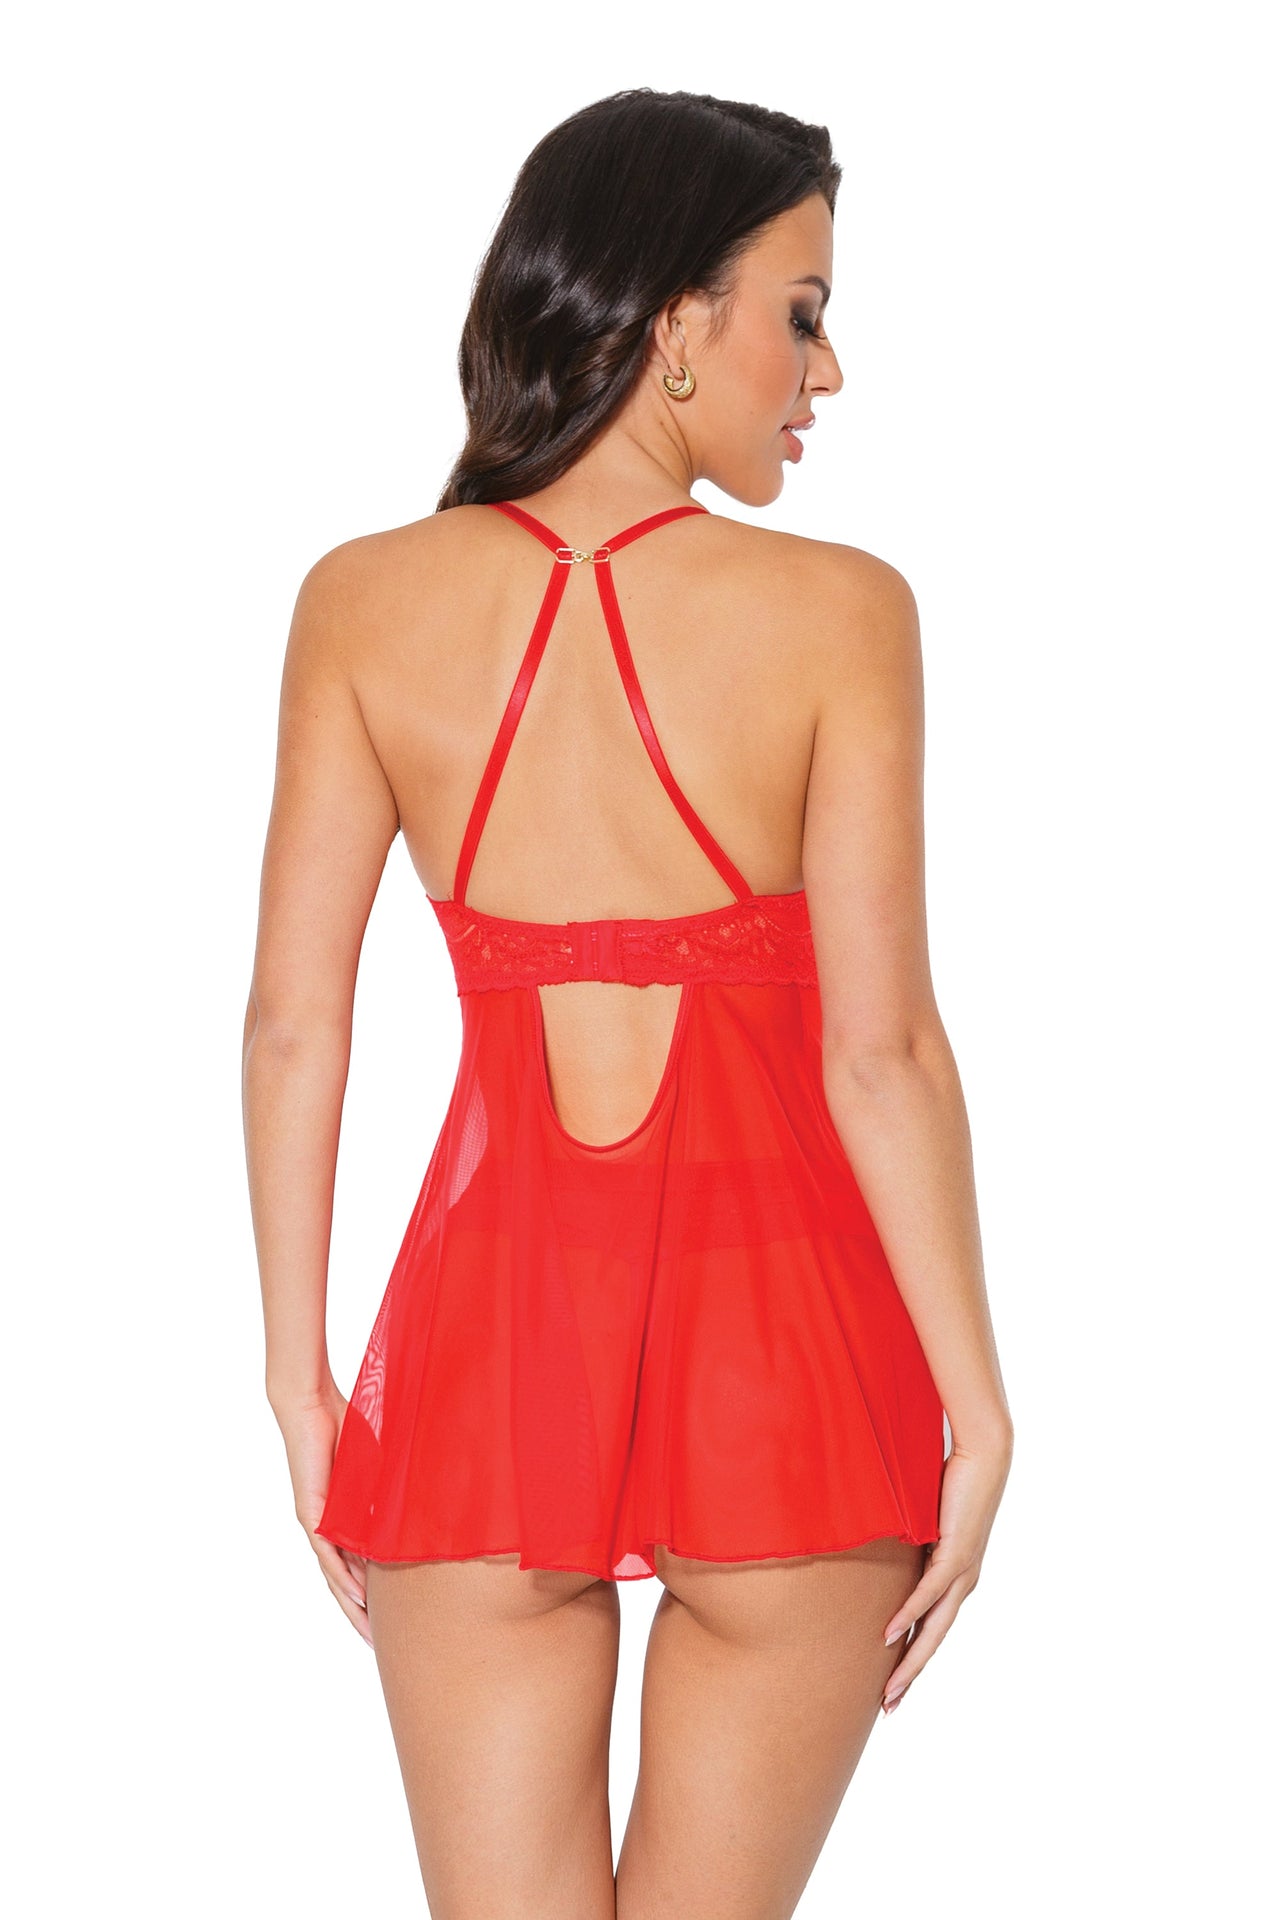 Coquette - 23335 - Babydoll & Thong - Red - Stag Shop